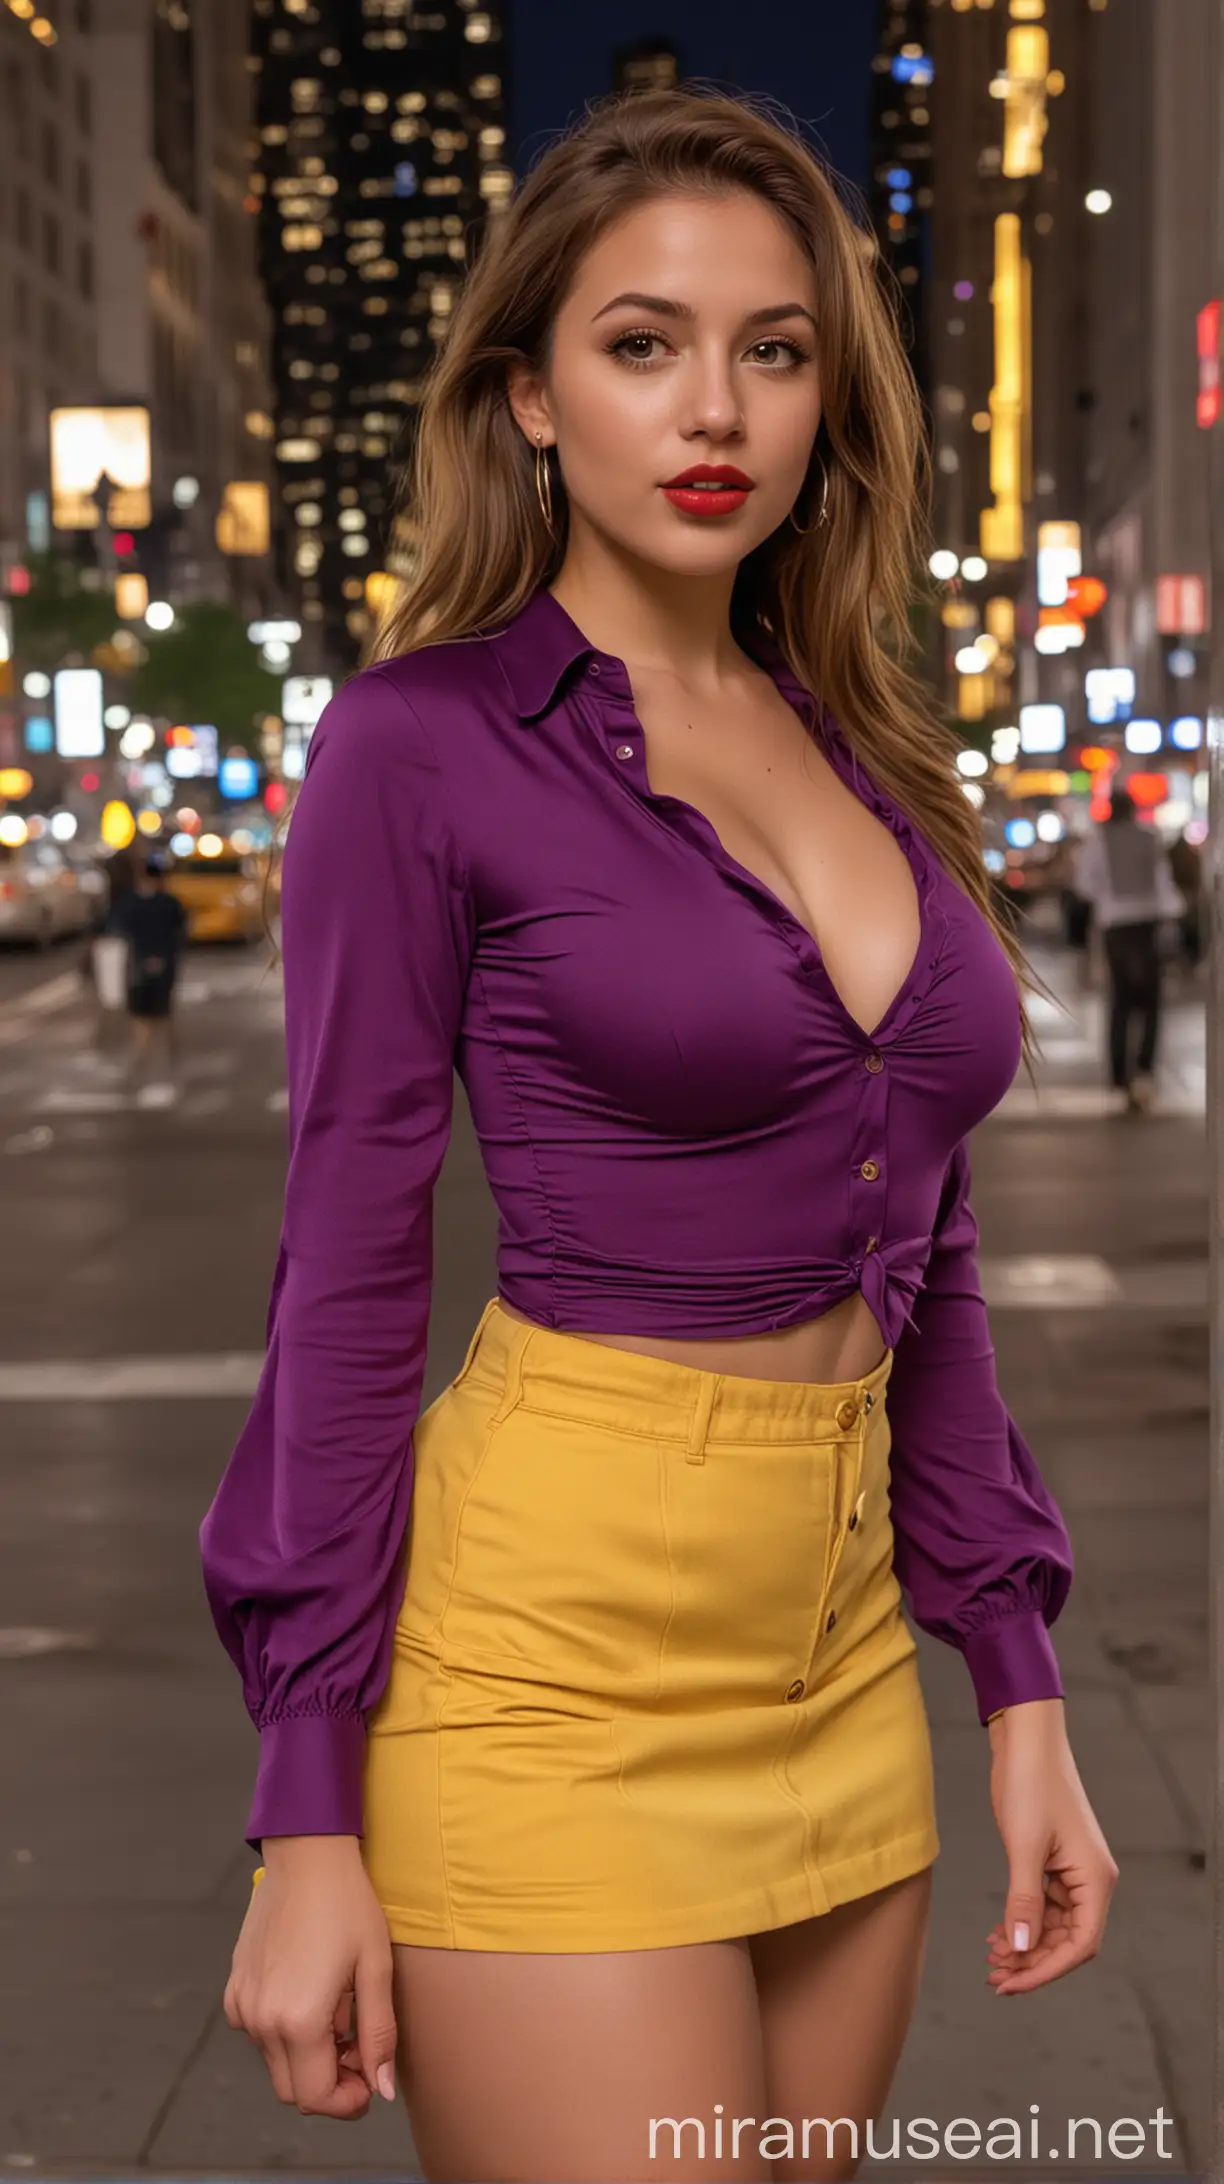 Elegant American Woman with Brown Hair and Stylish Attire at Plaza 5th Avenue Night View